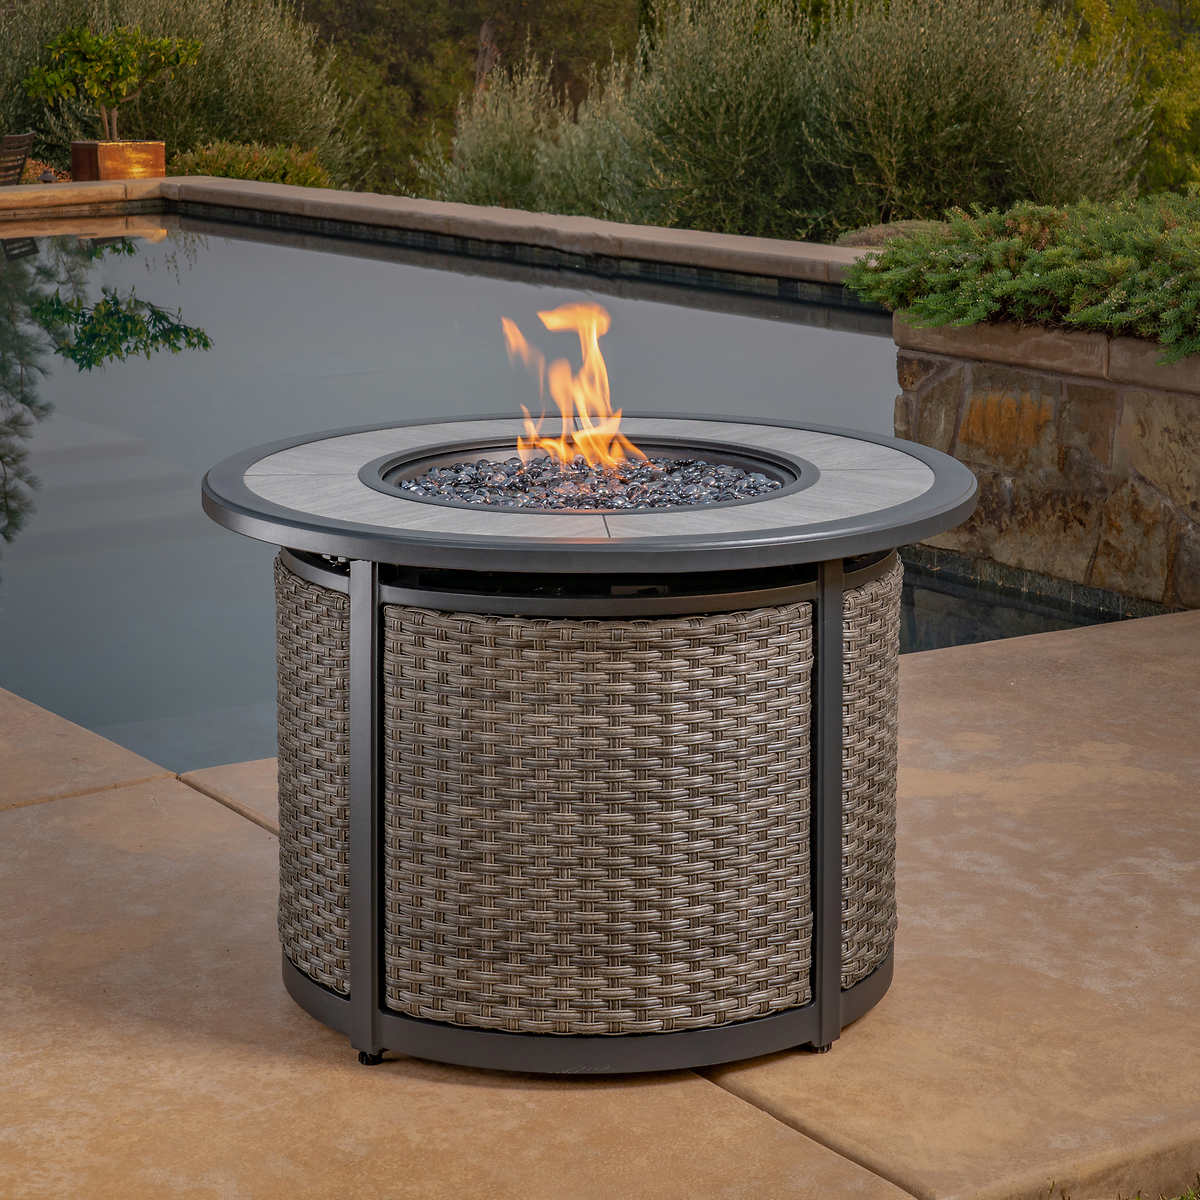 Madison Fire Pit Table Costco, Are Fire Pits Legal In California